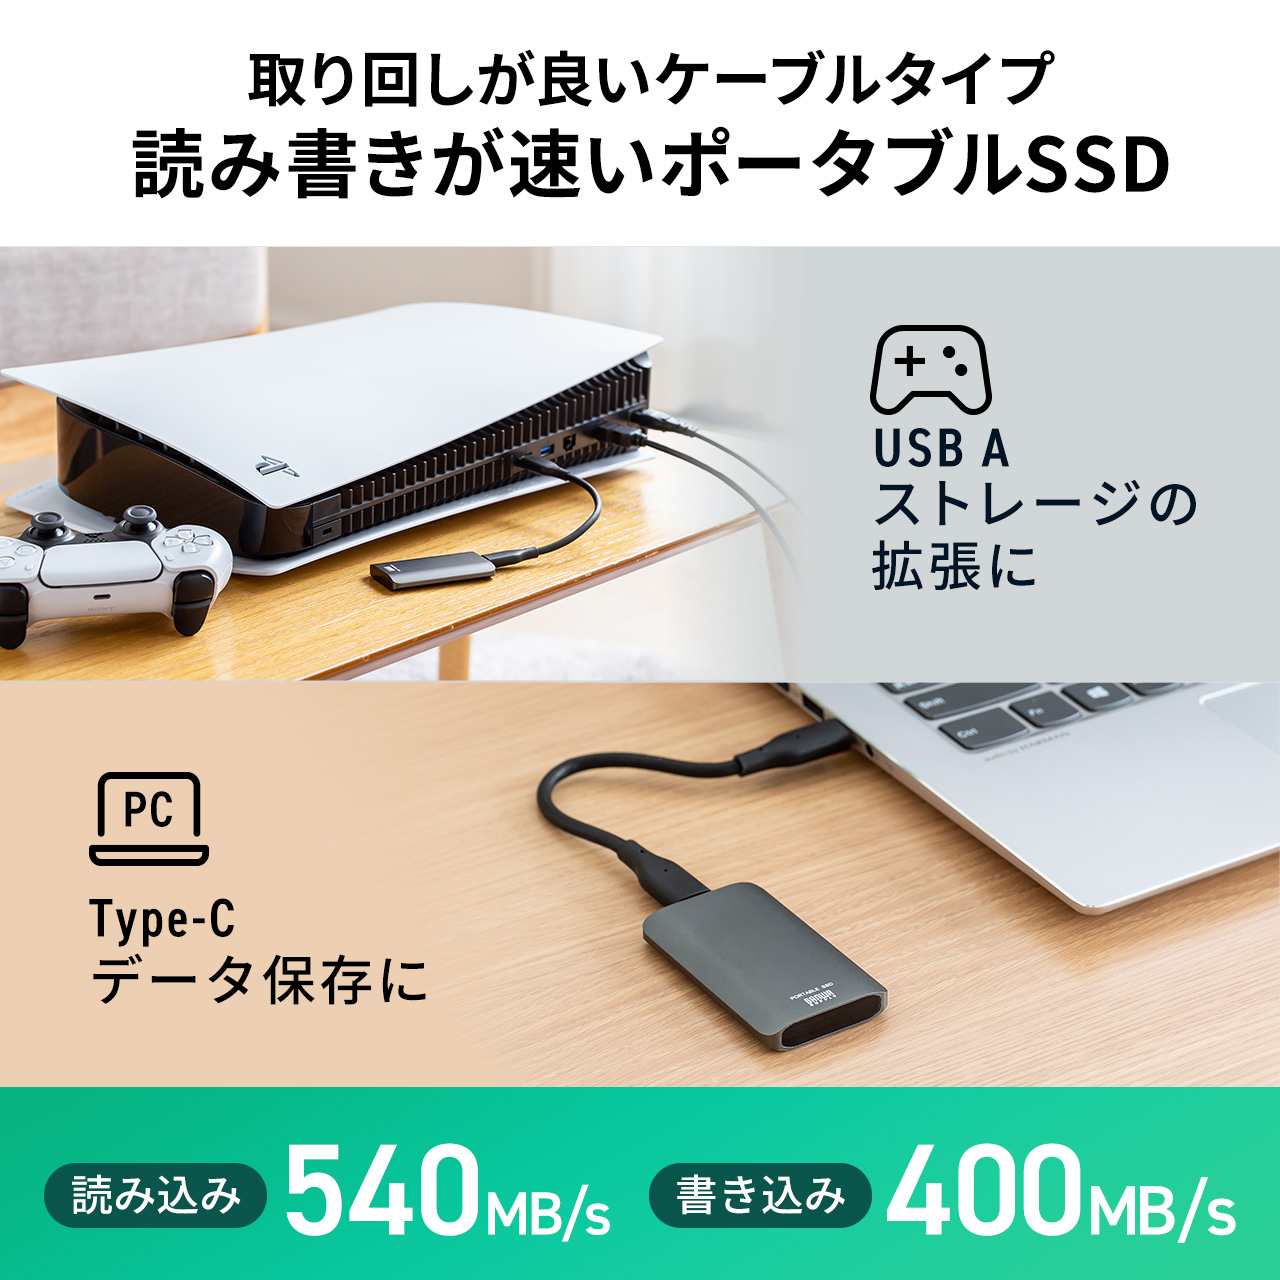 AEgbgF|[^uSSD Ot USB3.2 Gen2 512GB  őǂݍݑx540MB/s  ^ er^ PS5/PS4/Type-A/Type-C Z600-USSDS512GB